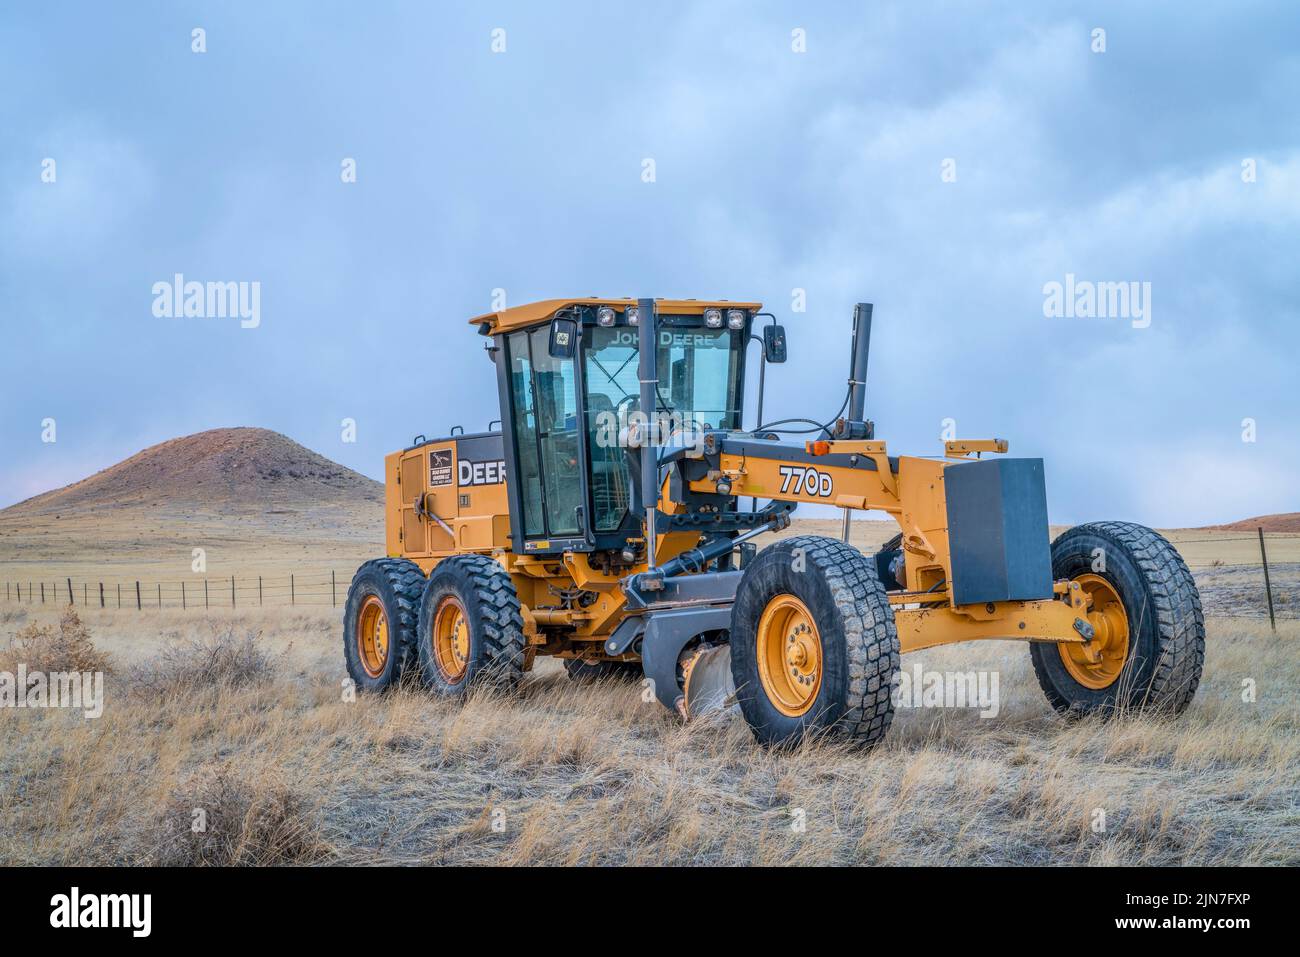 Fort Collins, CO, USA - March 31, 2022: Deere 770D motor grader at Colorado foothills used for dirt road maintenance, early spring scenery at dusk. Stock Photo